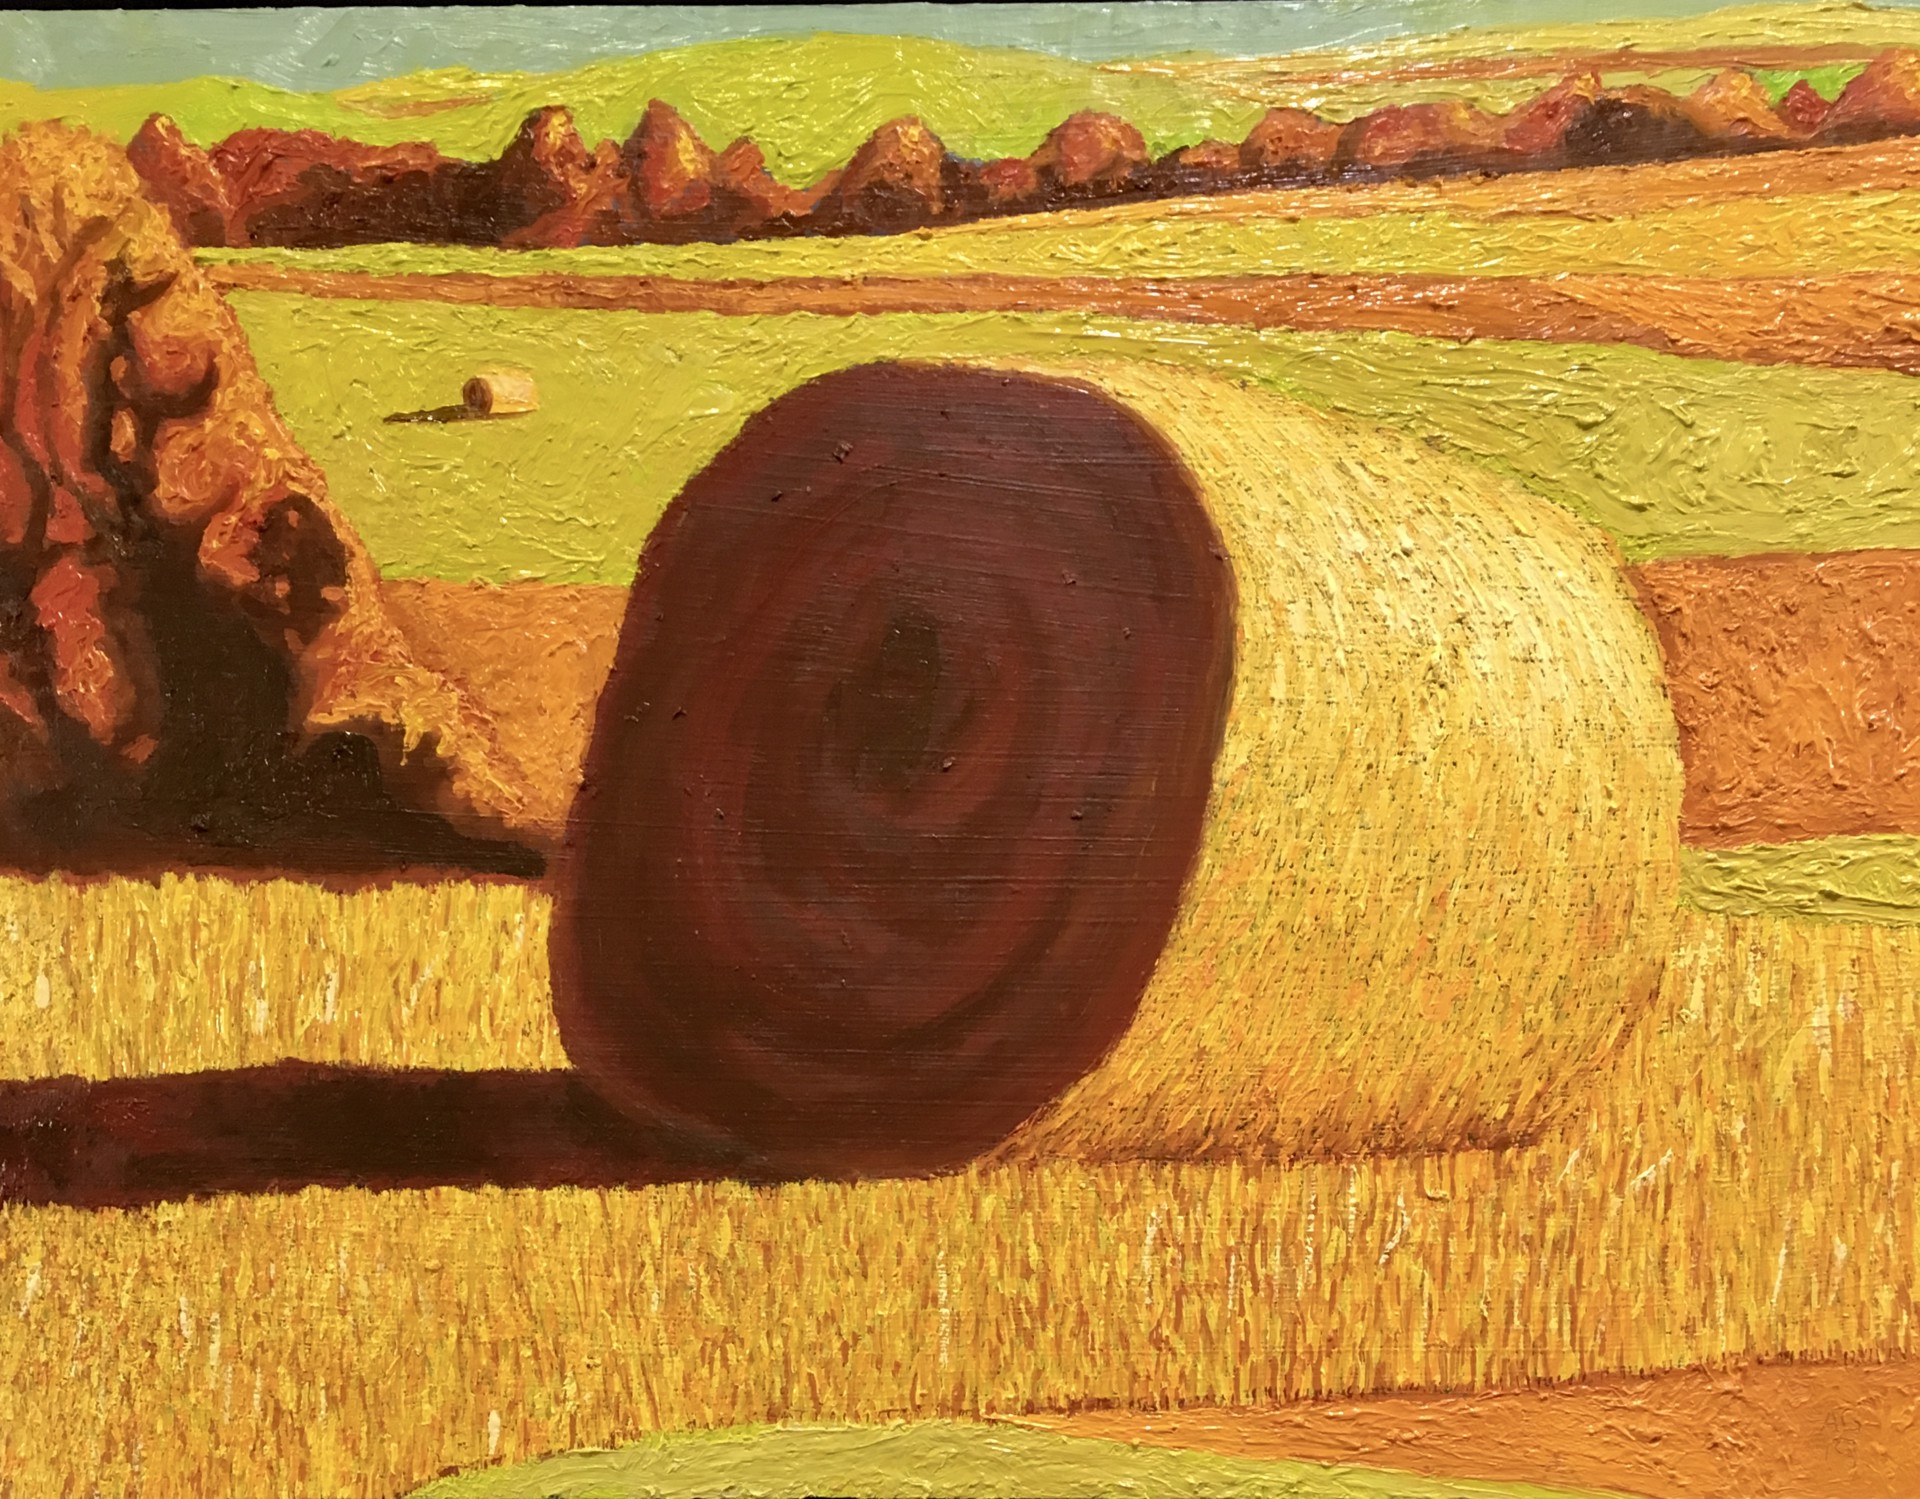 Hay by Alan Gerson